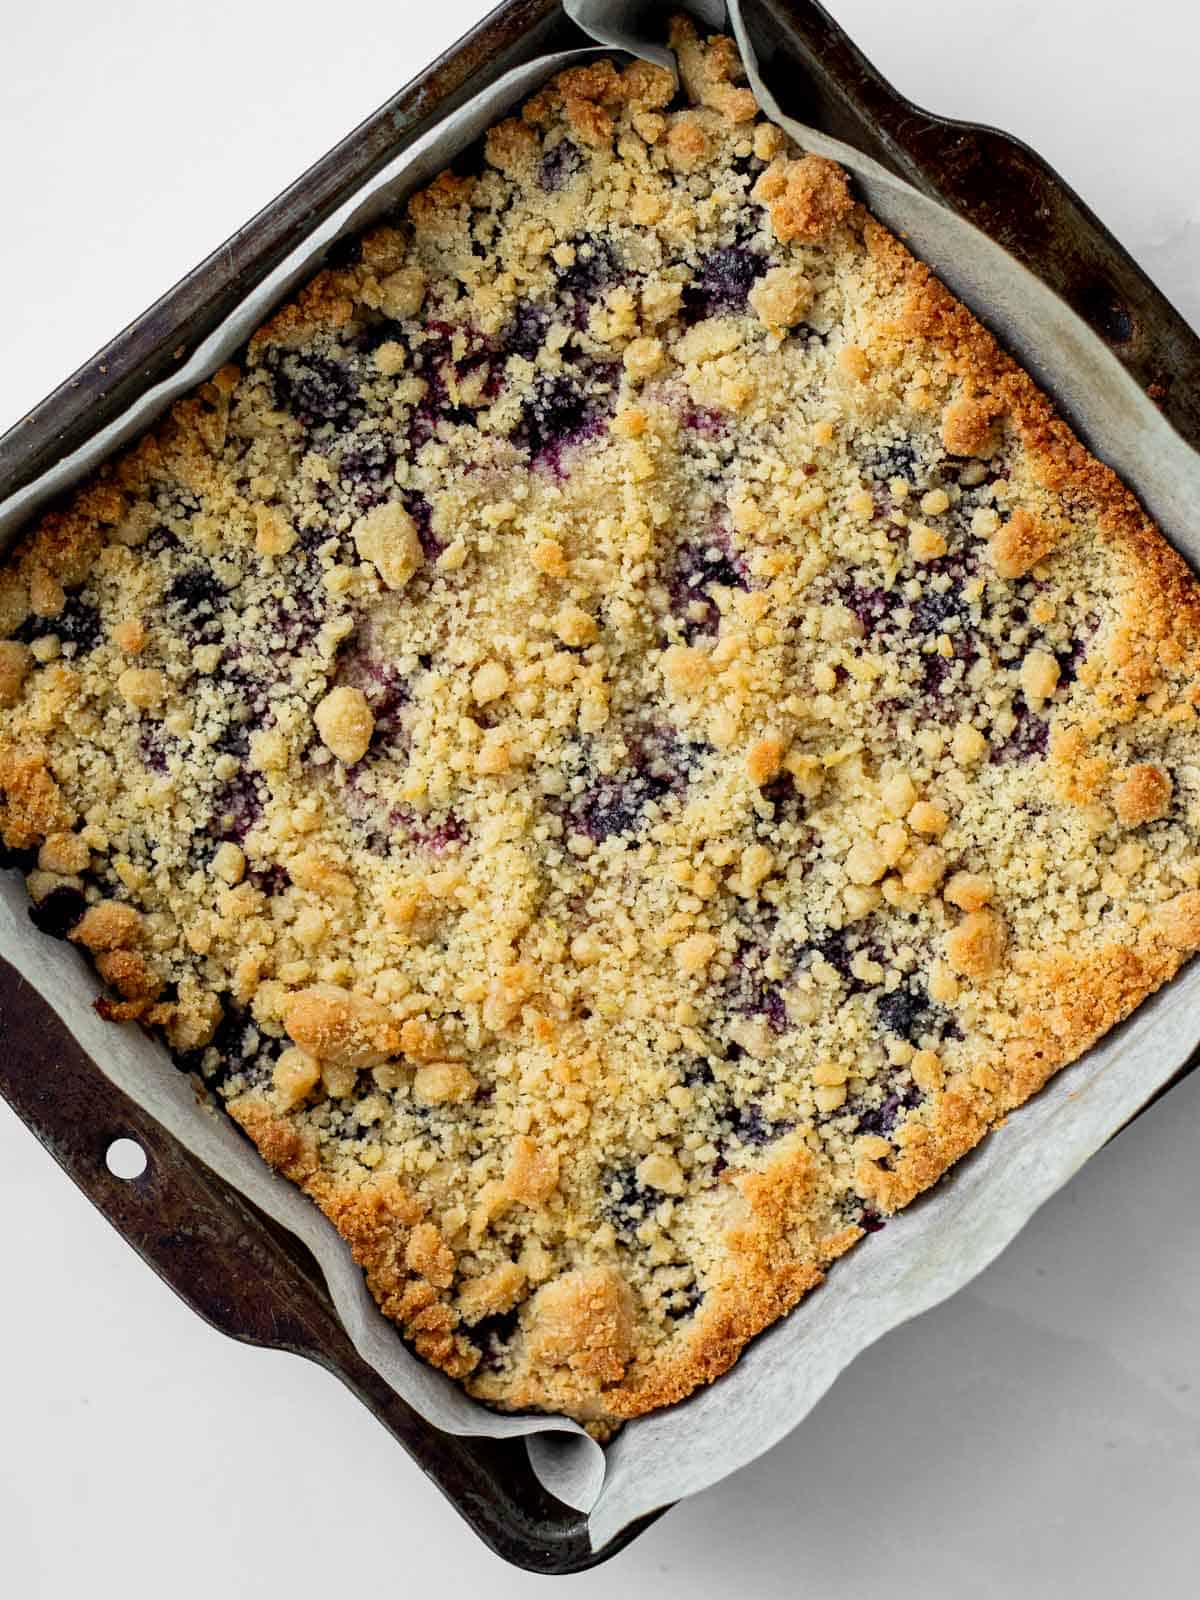 baked blueberry lemon shortbread in a parchment lined baking pan.